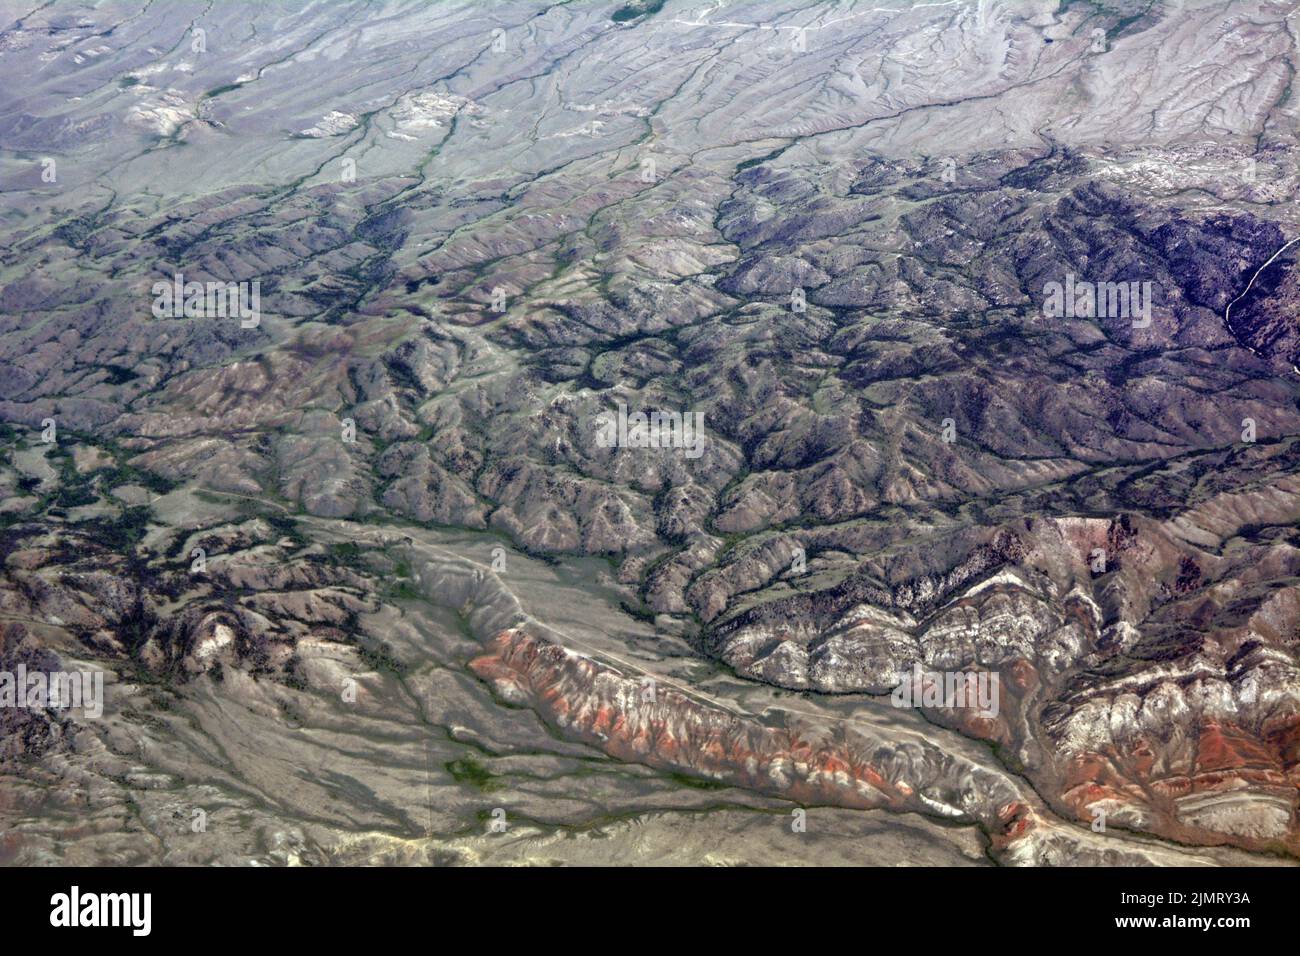 Aerial view of the Bennett Mountains in the semi-arid high desert of Carbon County, southern Wyoming, United States. Stock Photo